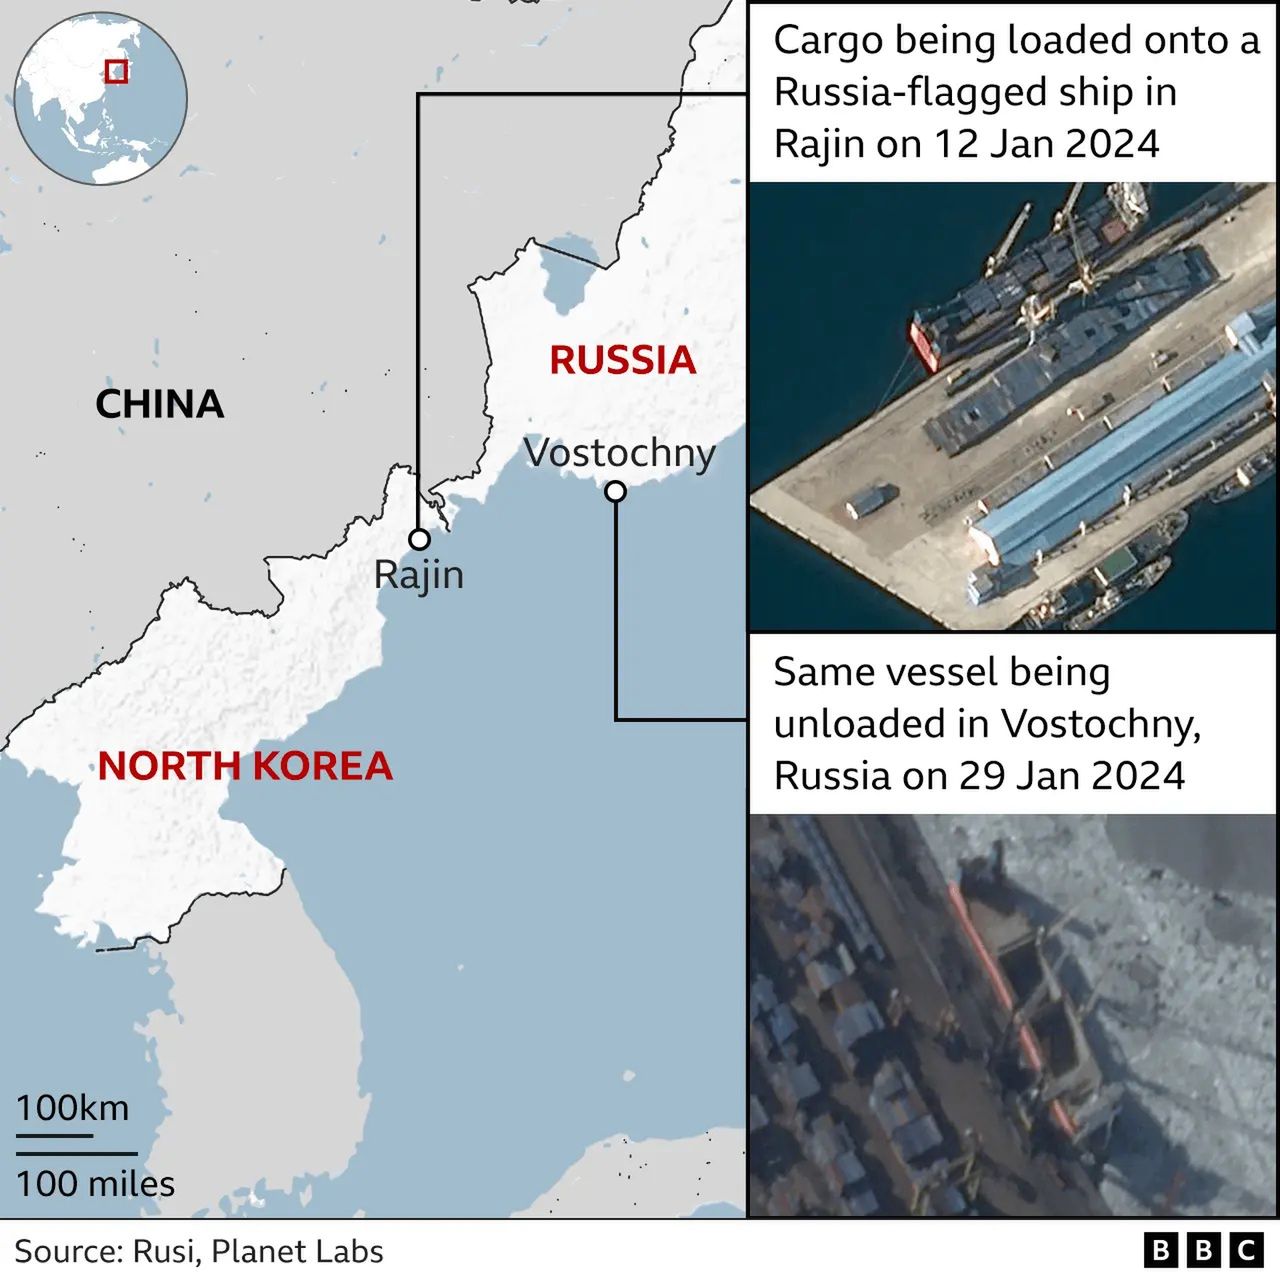 A ship from Russia loaded in a North Korean port.